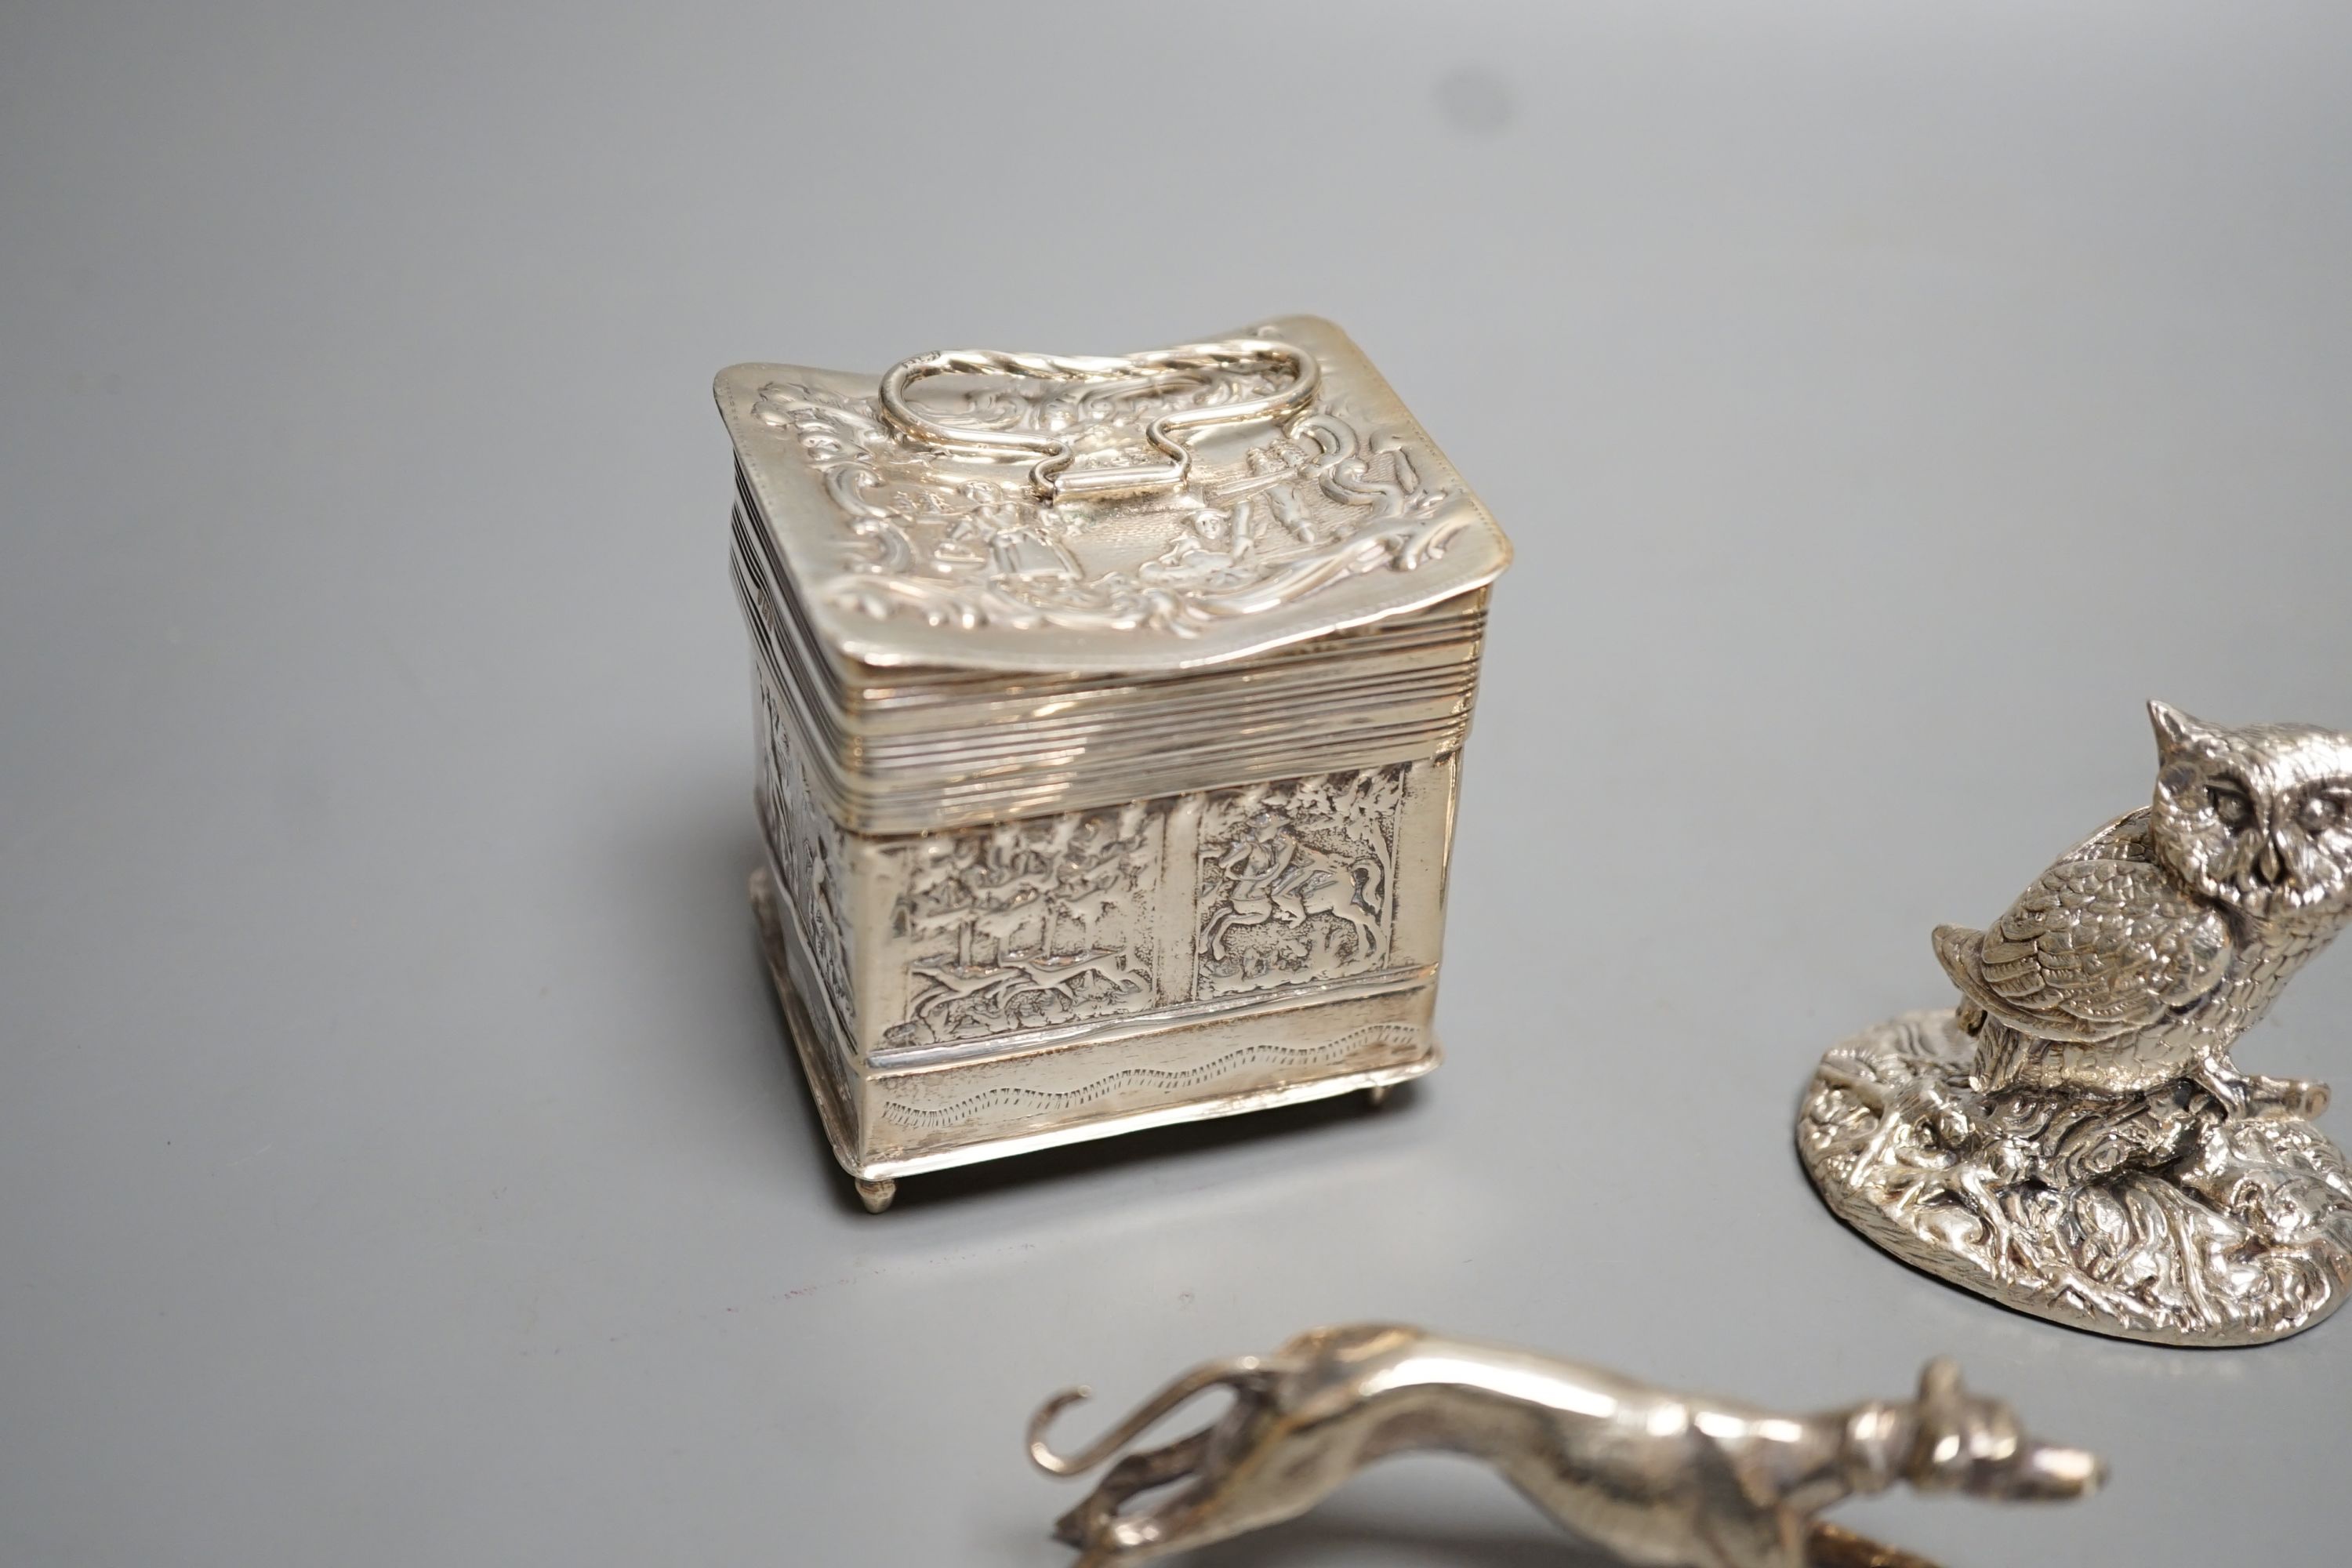 A continental embossed silver box, with import marks for London, 1903, 65mm, a modern silver filled model owl and a metal model of a dog.